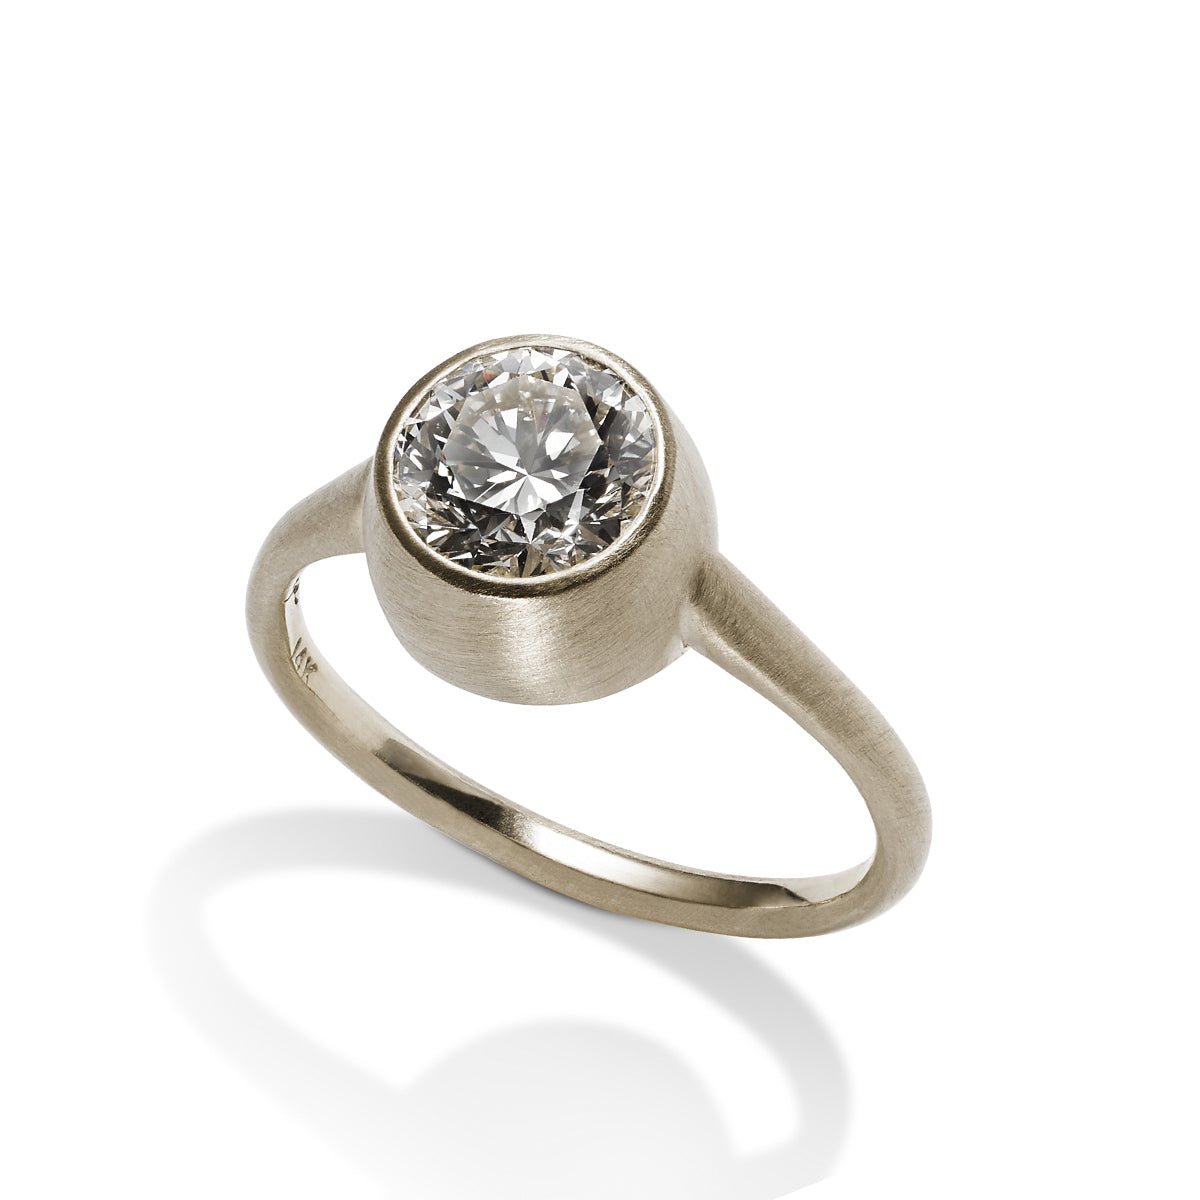 Modern statement Salire ring from Betsy & Iya. Features a round brilliant-cut lab-grown diamond (1.3 ct) and 14K white gold. Designed and handcrafted in our Portland, Oregon studio.